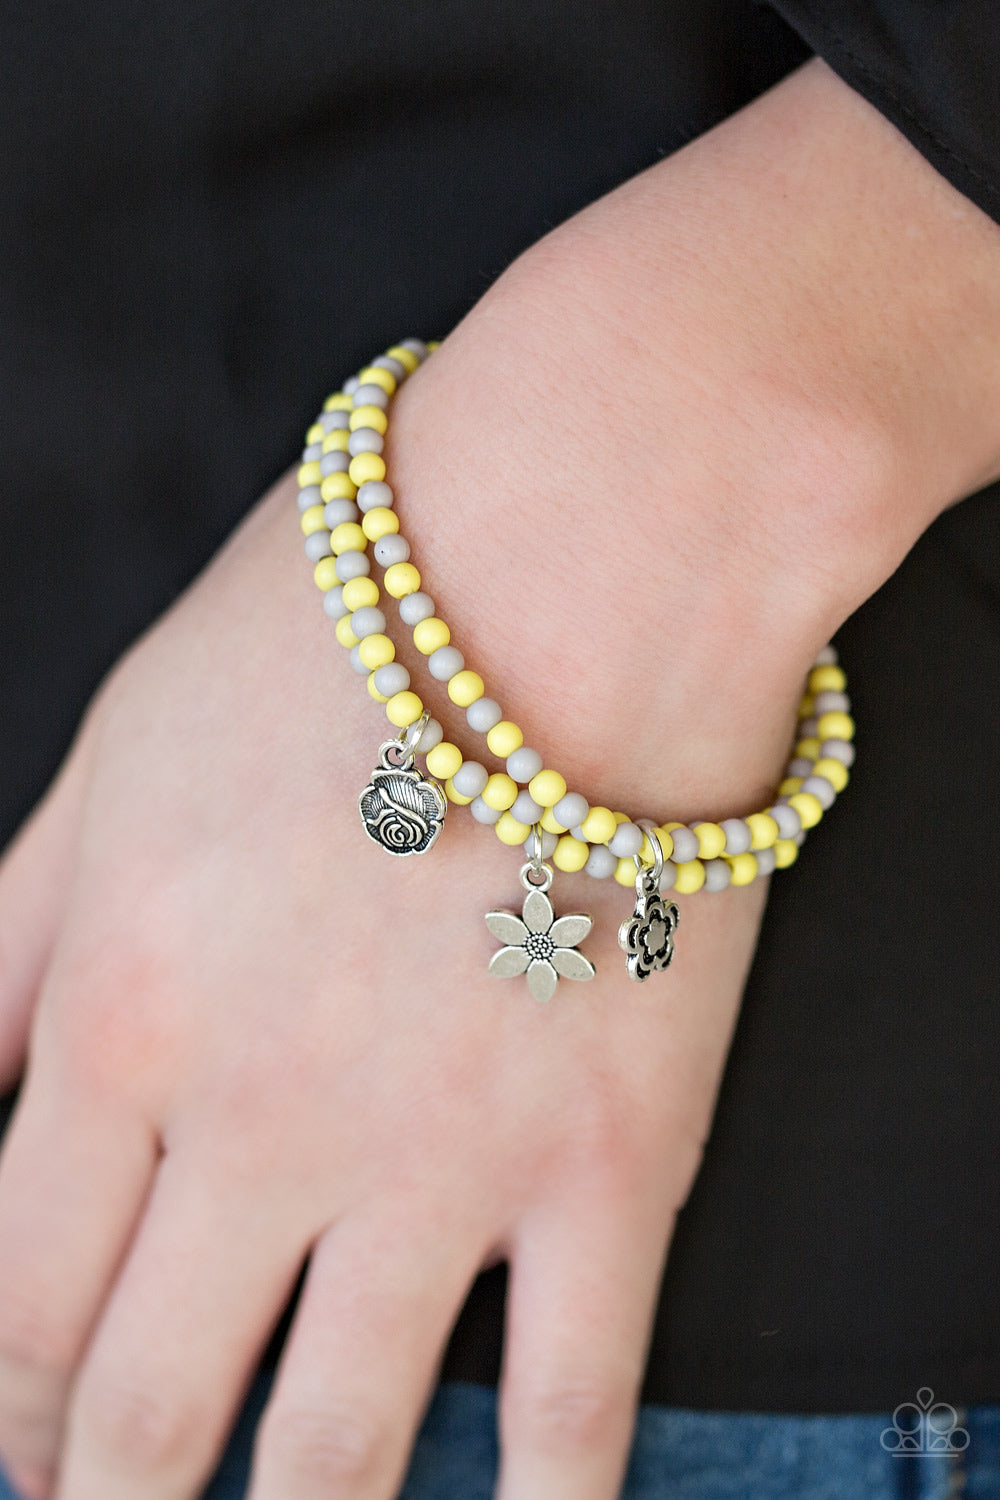 Paparazzi Rooftop Gardens - Yellow - Gray Beads - Set of 3 Stretchy Band Bracelets - $5 Jewelry With Ashley Swint